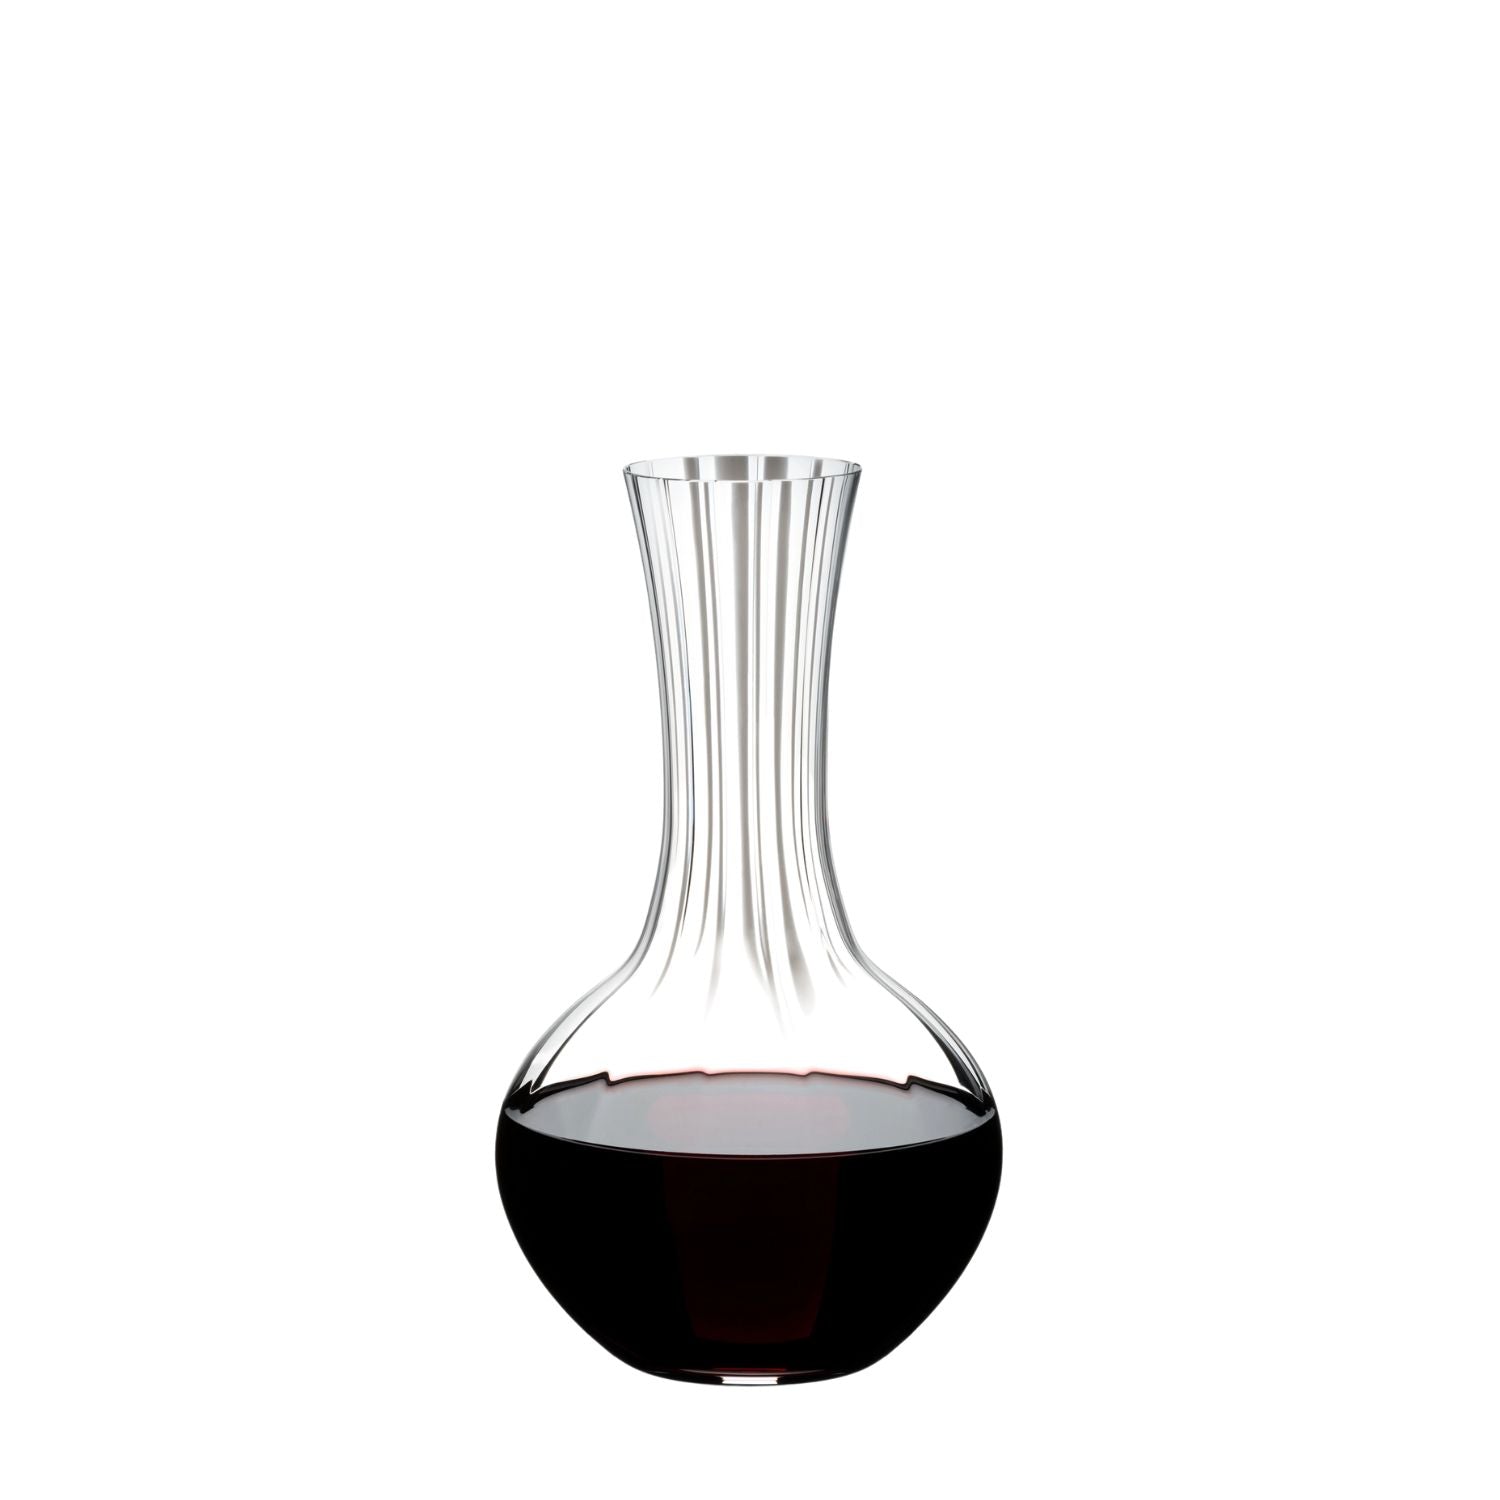 Crystal Decanters - Water Carafe, Wine Decanter, Magnum Decanter